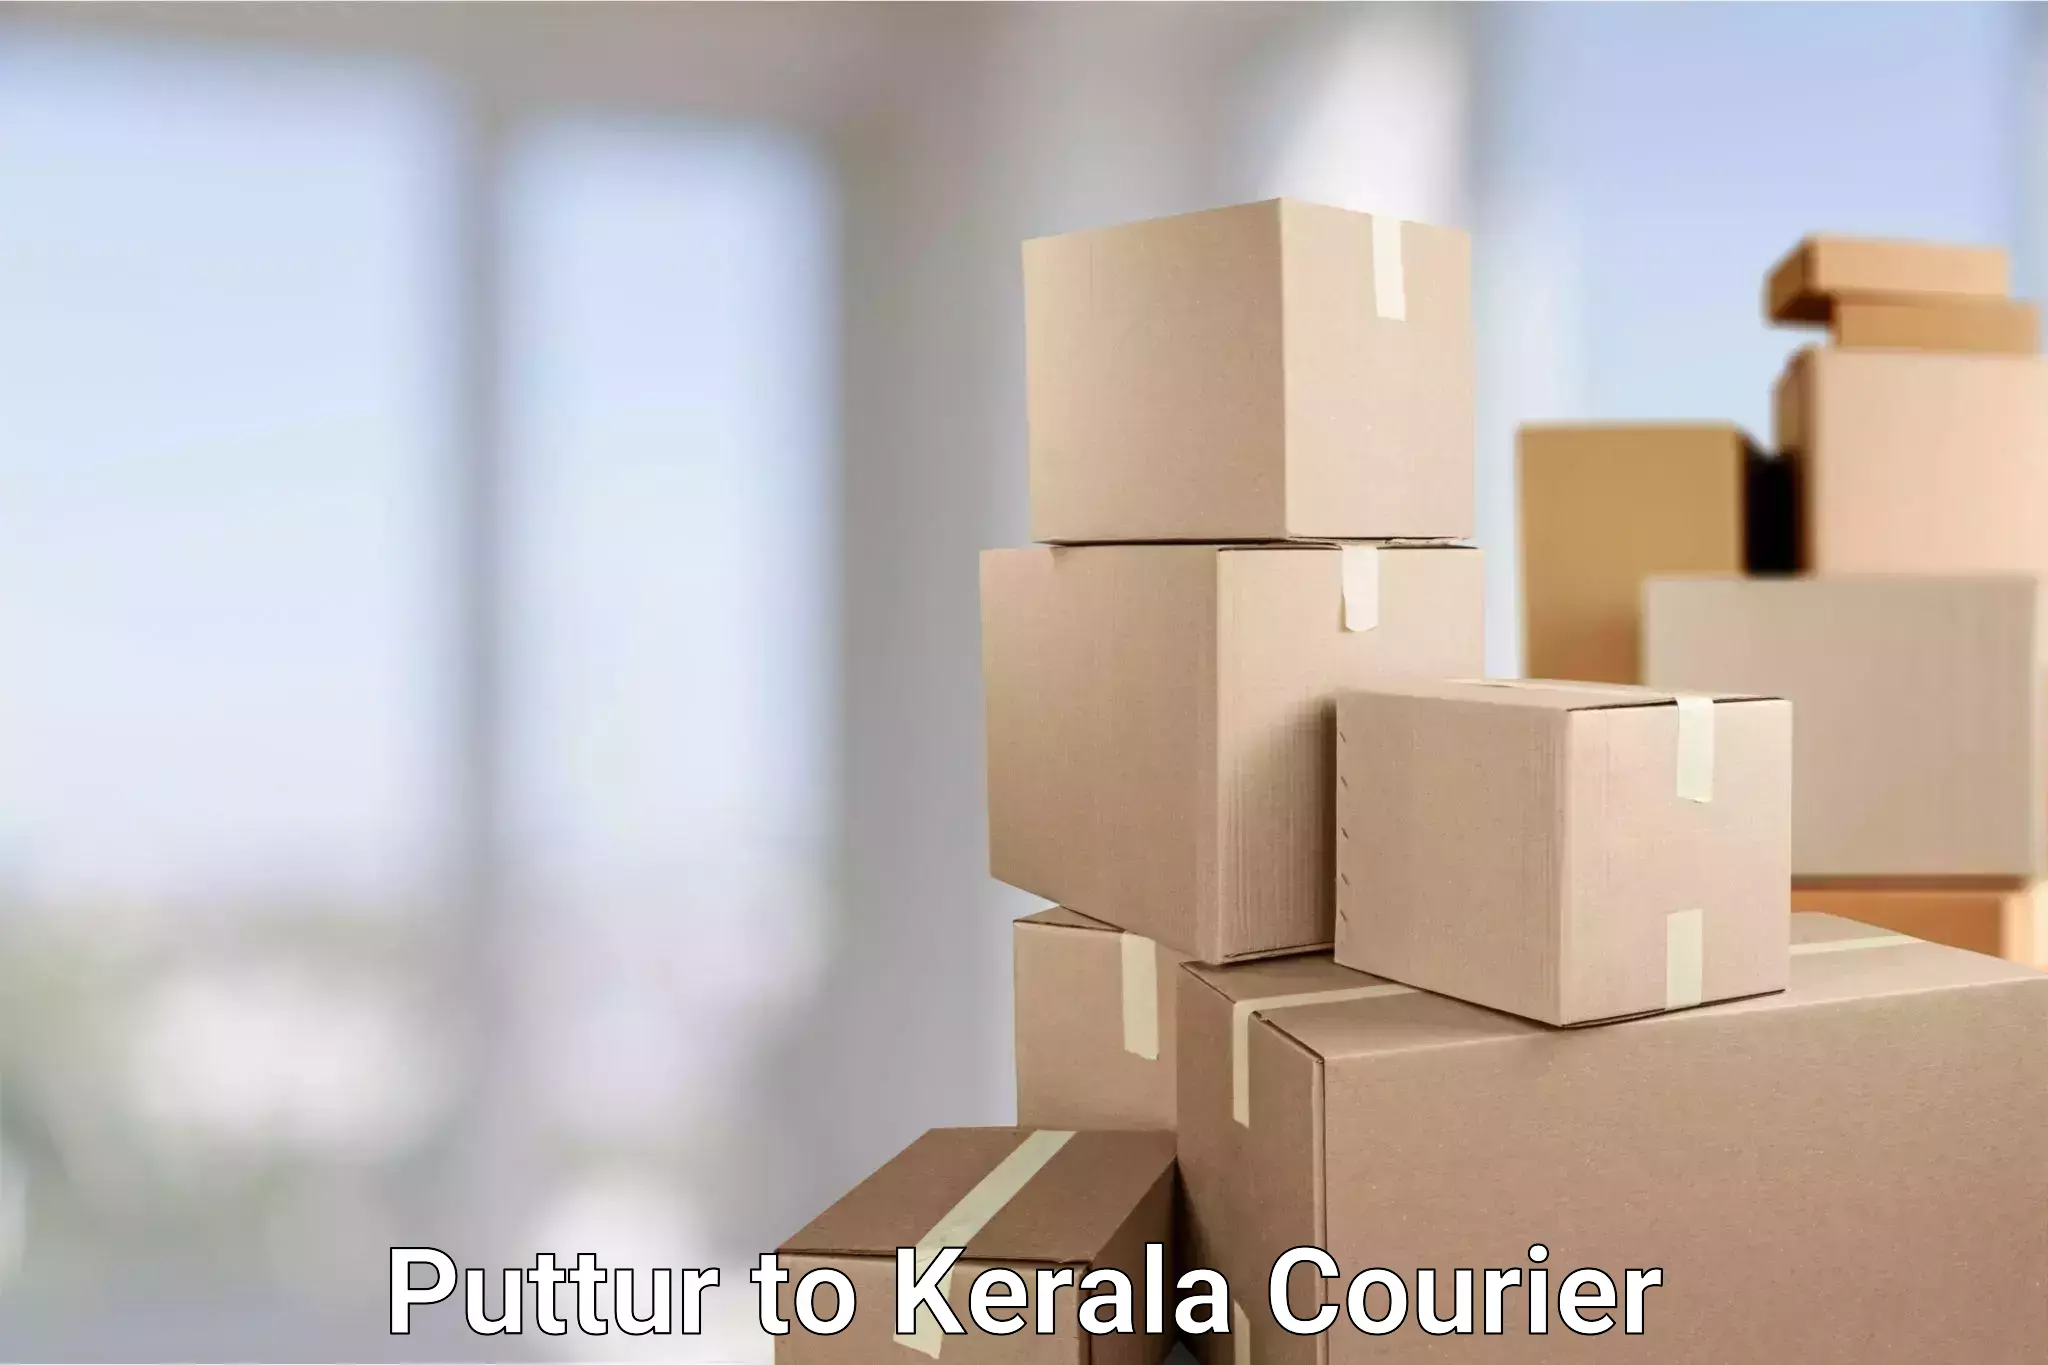 Global shipping networks Puttur to Manjeri